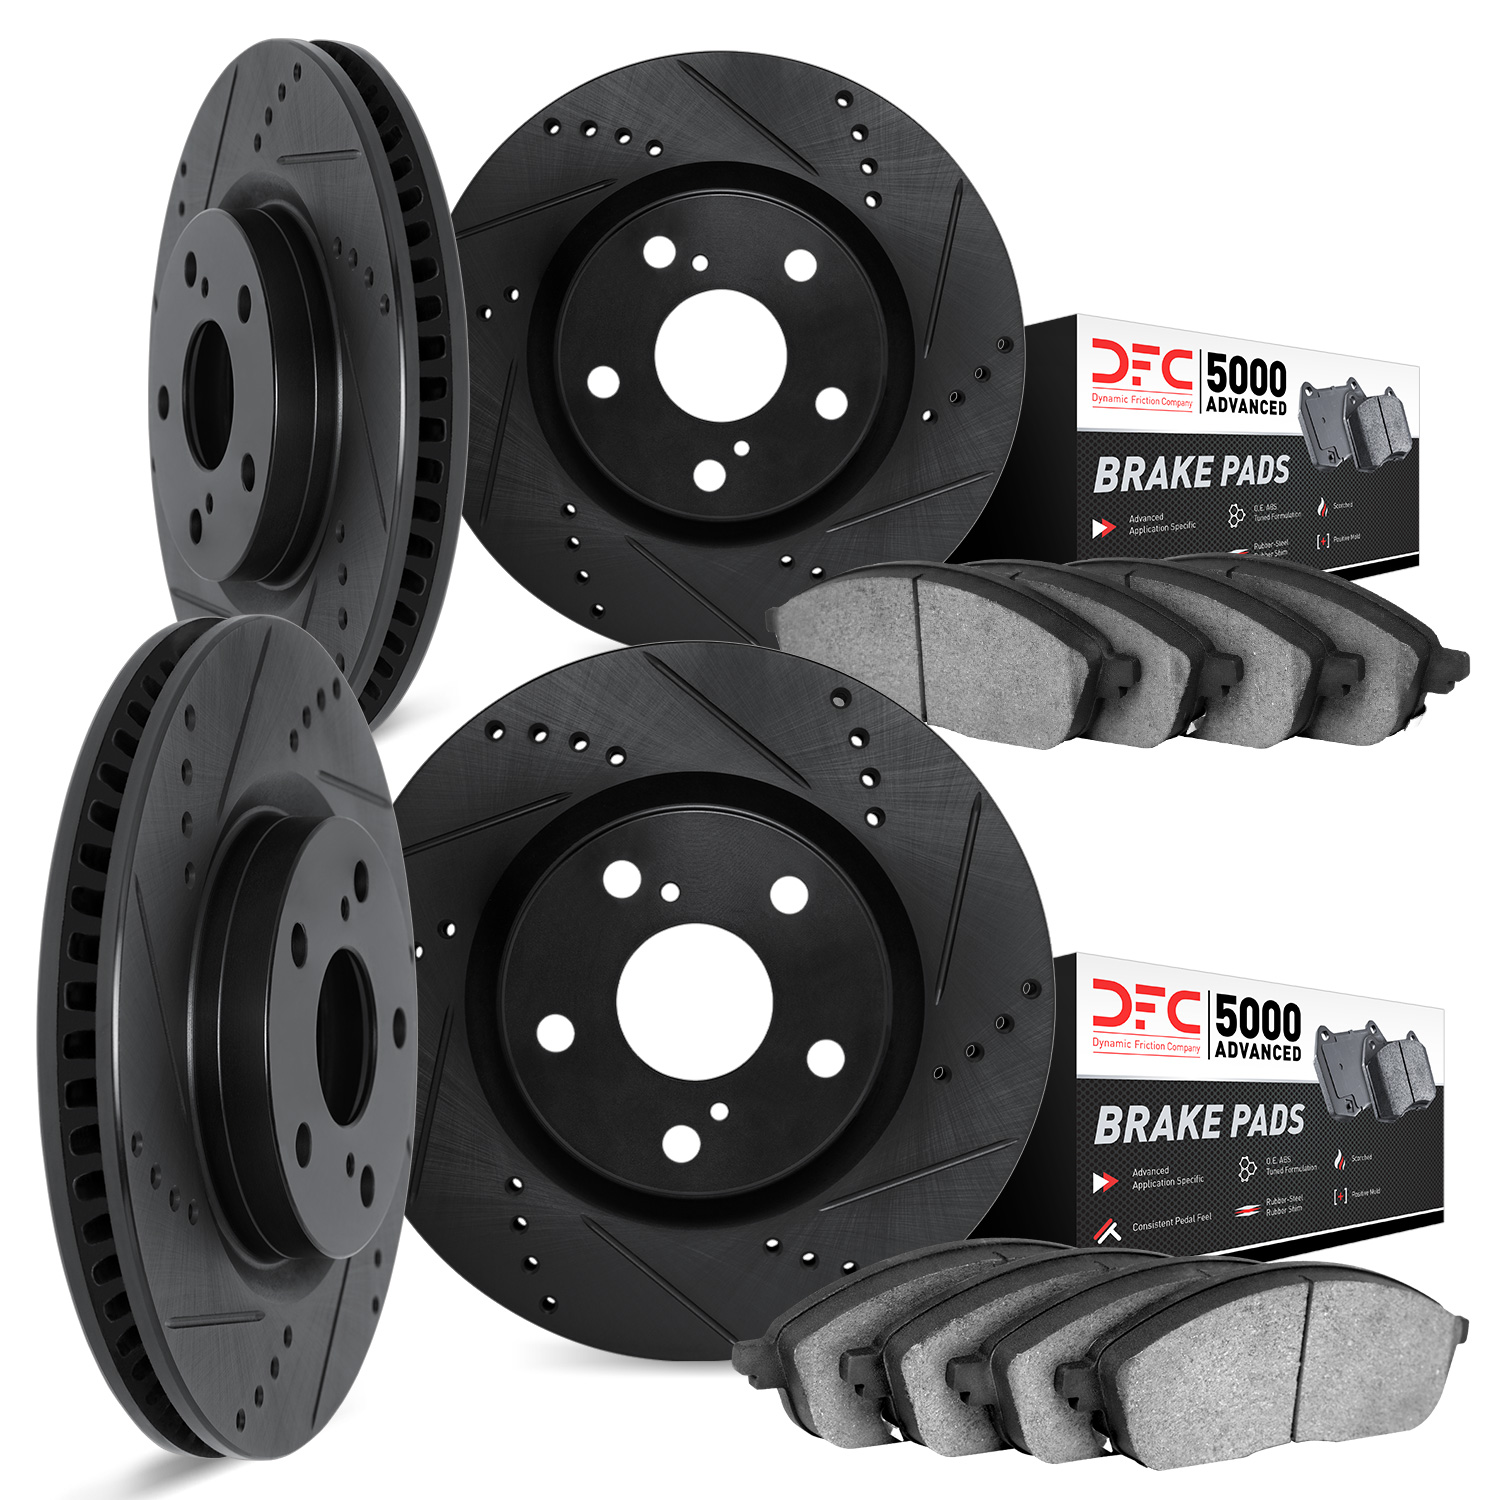 8504-75020 Drilled/Slotted Brake Rotors w/5000 Advanced Brake Pads Kit [Black], 2007-2017 Lexus/Toyota/Scion, Position: Front an